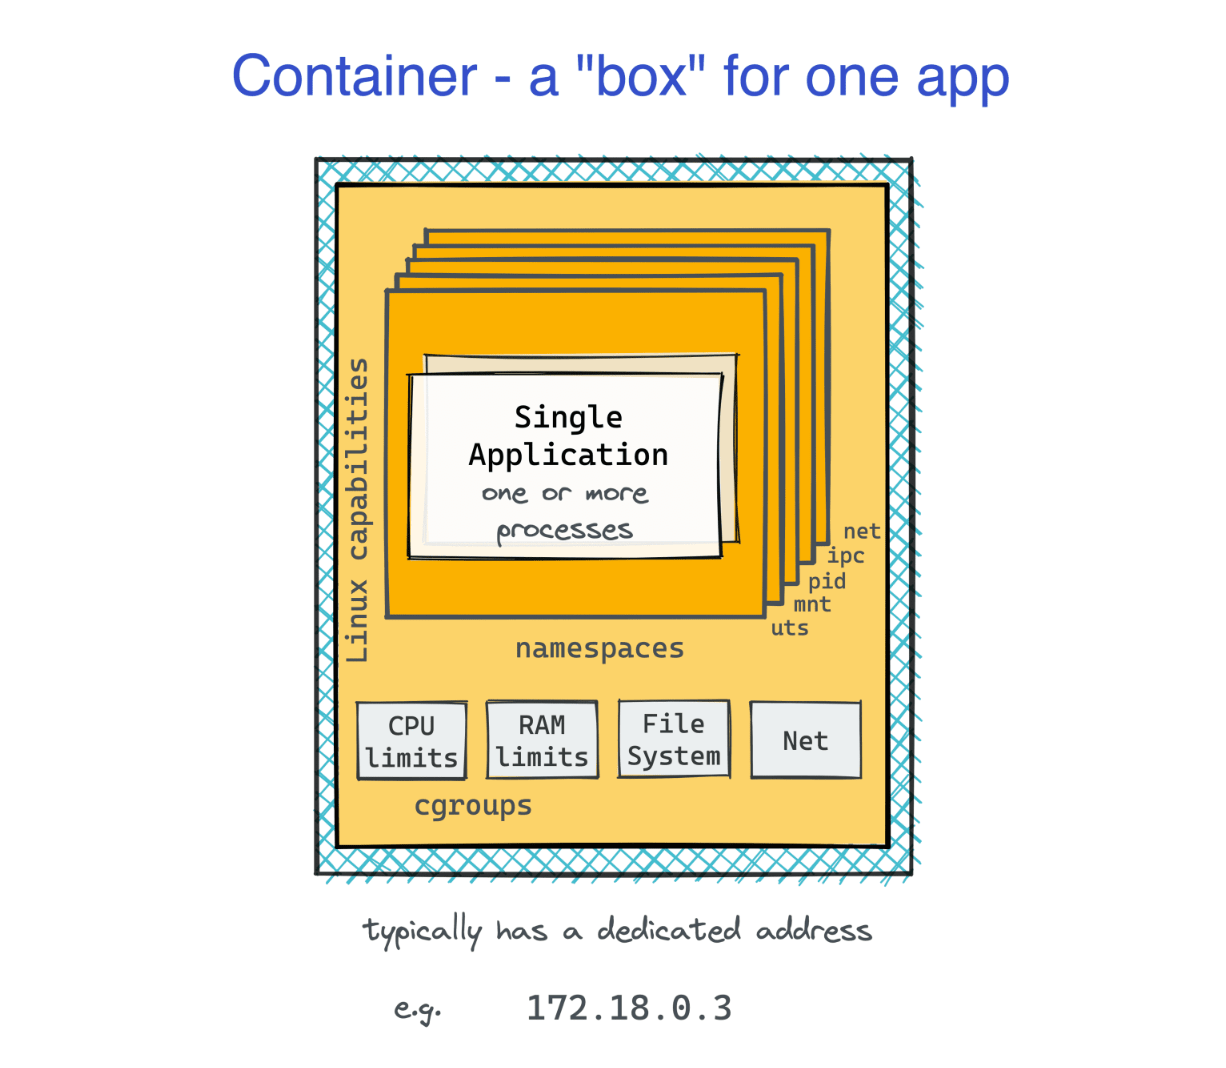 Linux container visualized as a box for one application.